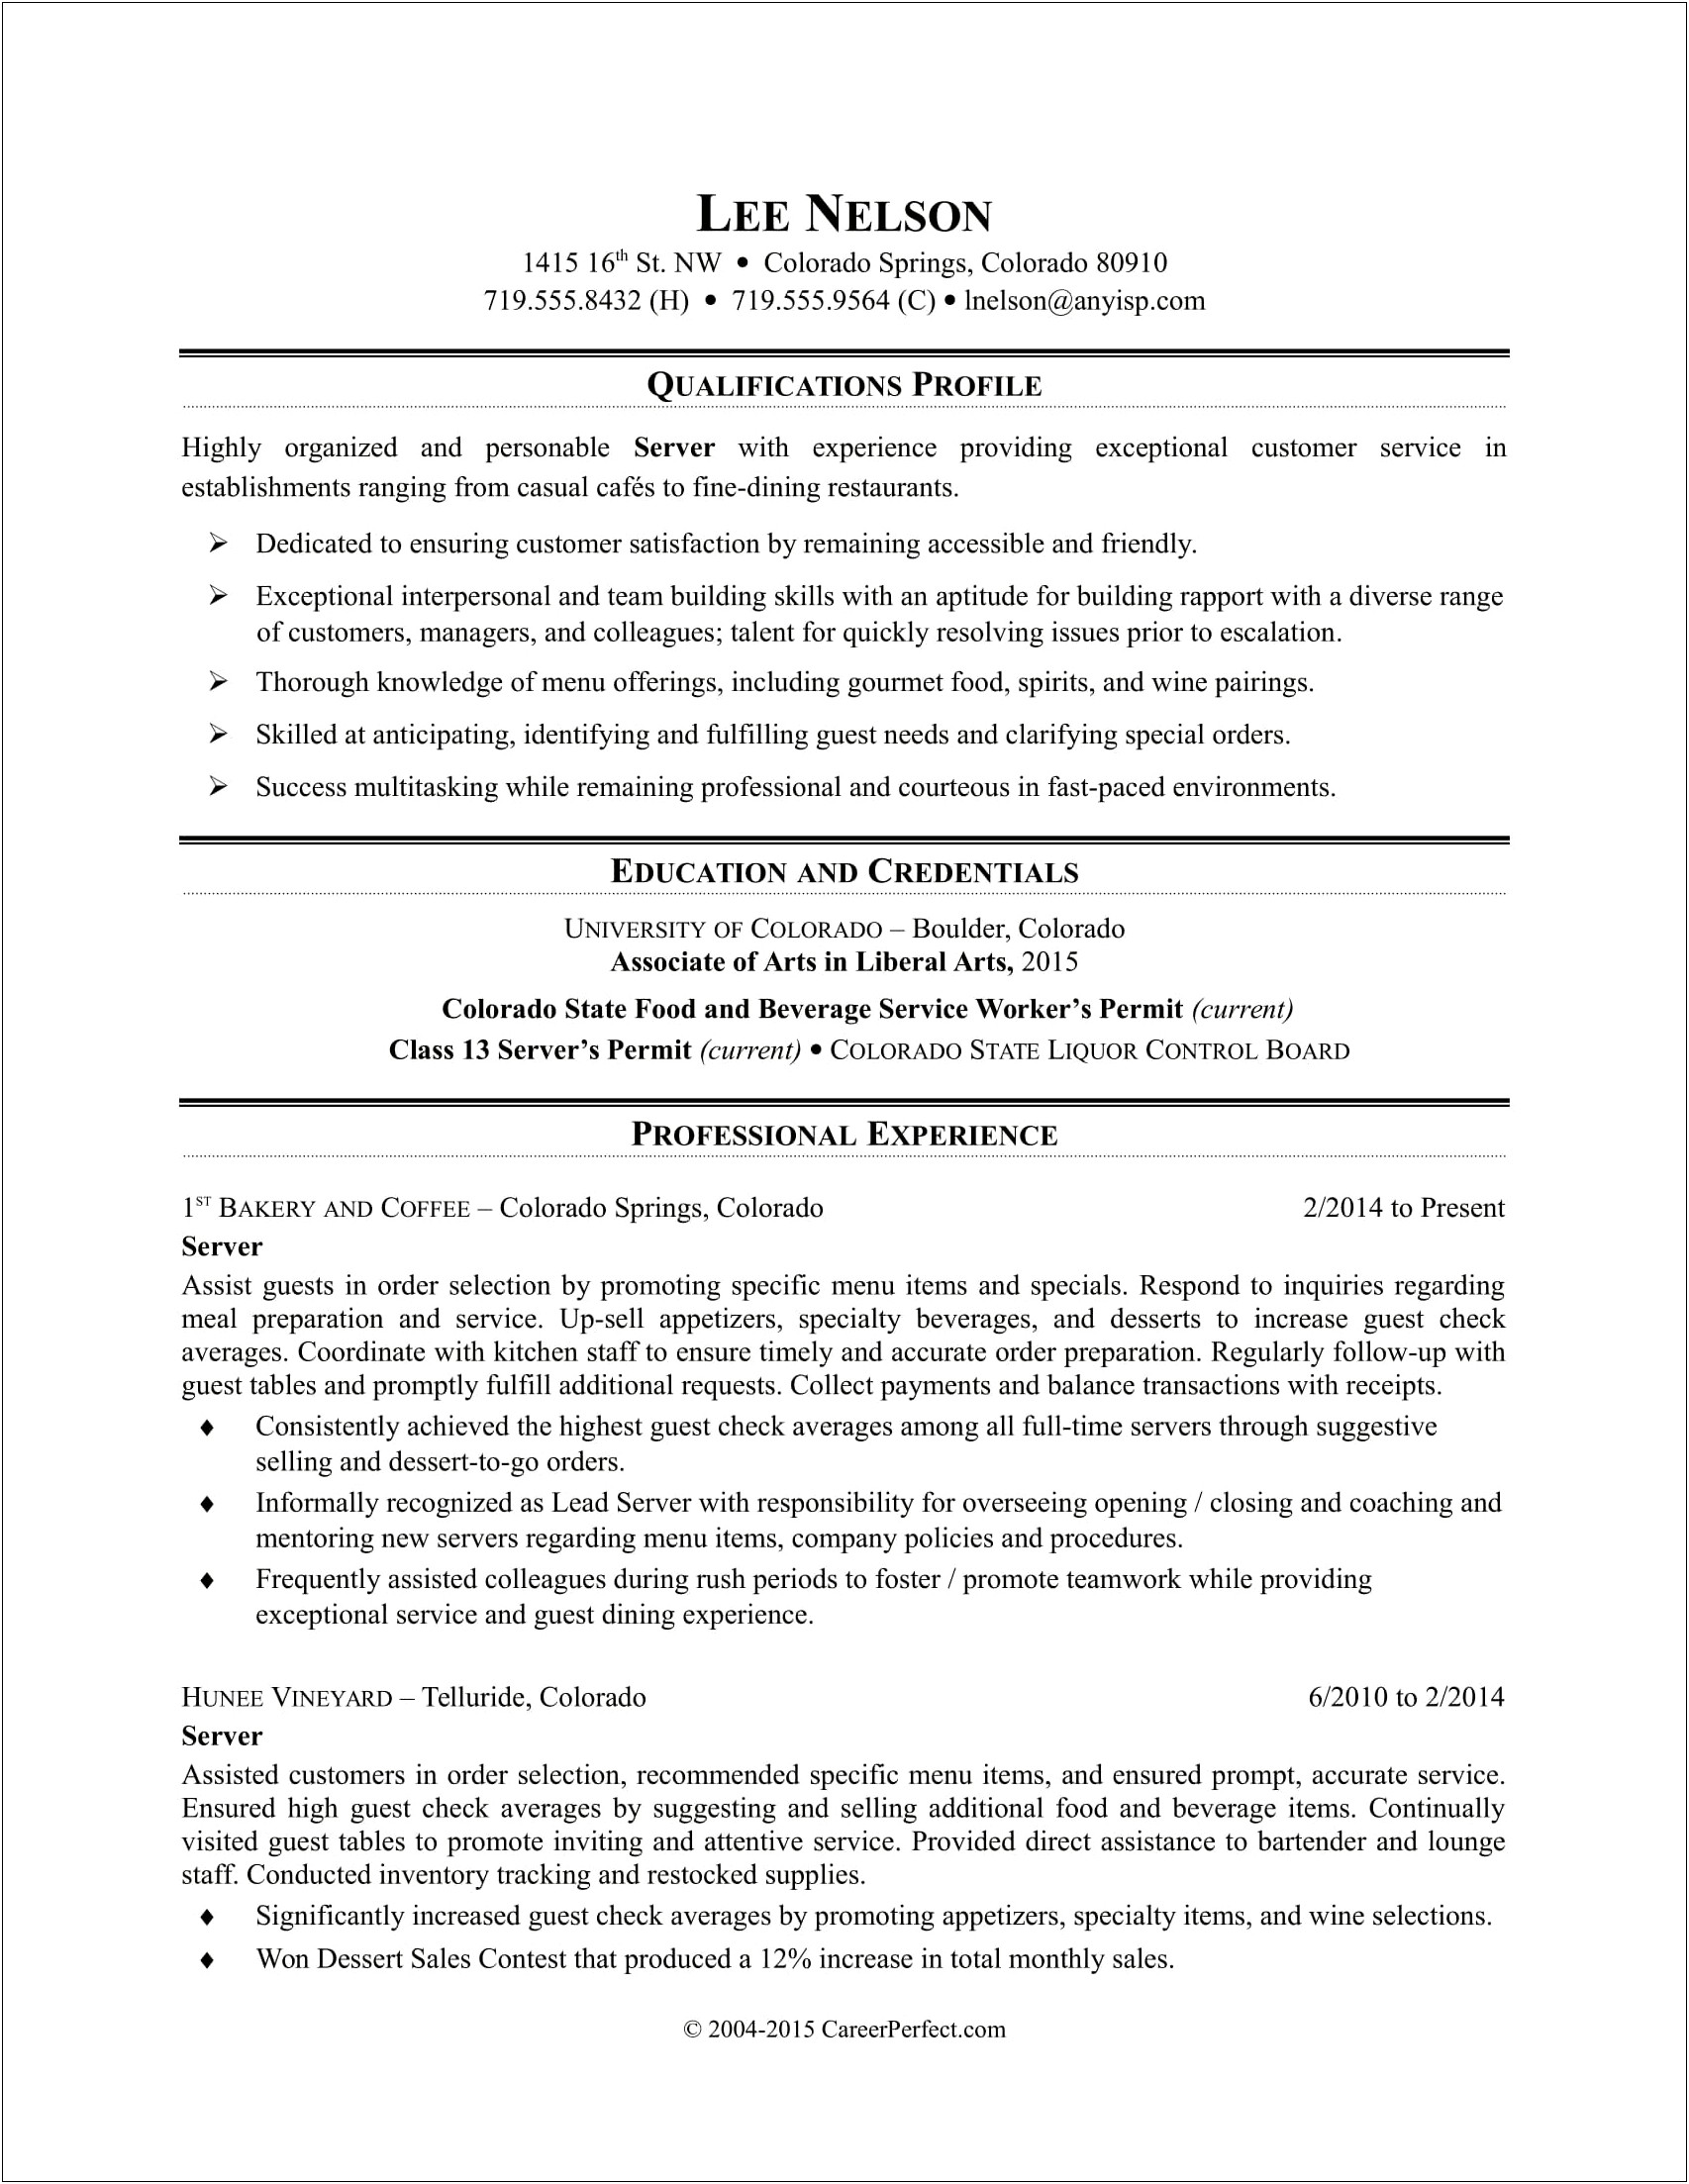 A Year Off On Work Experience On Resume